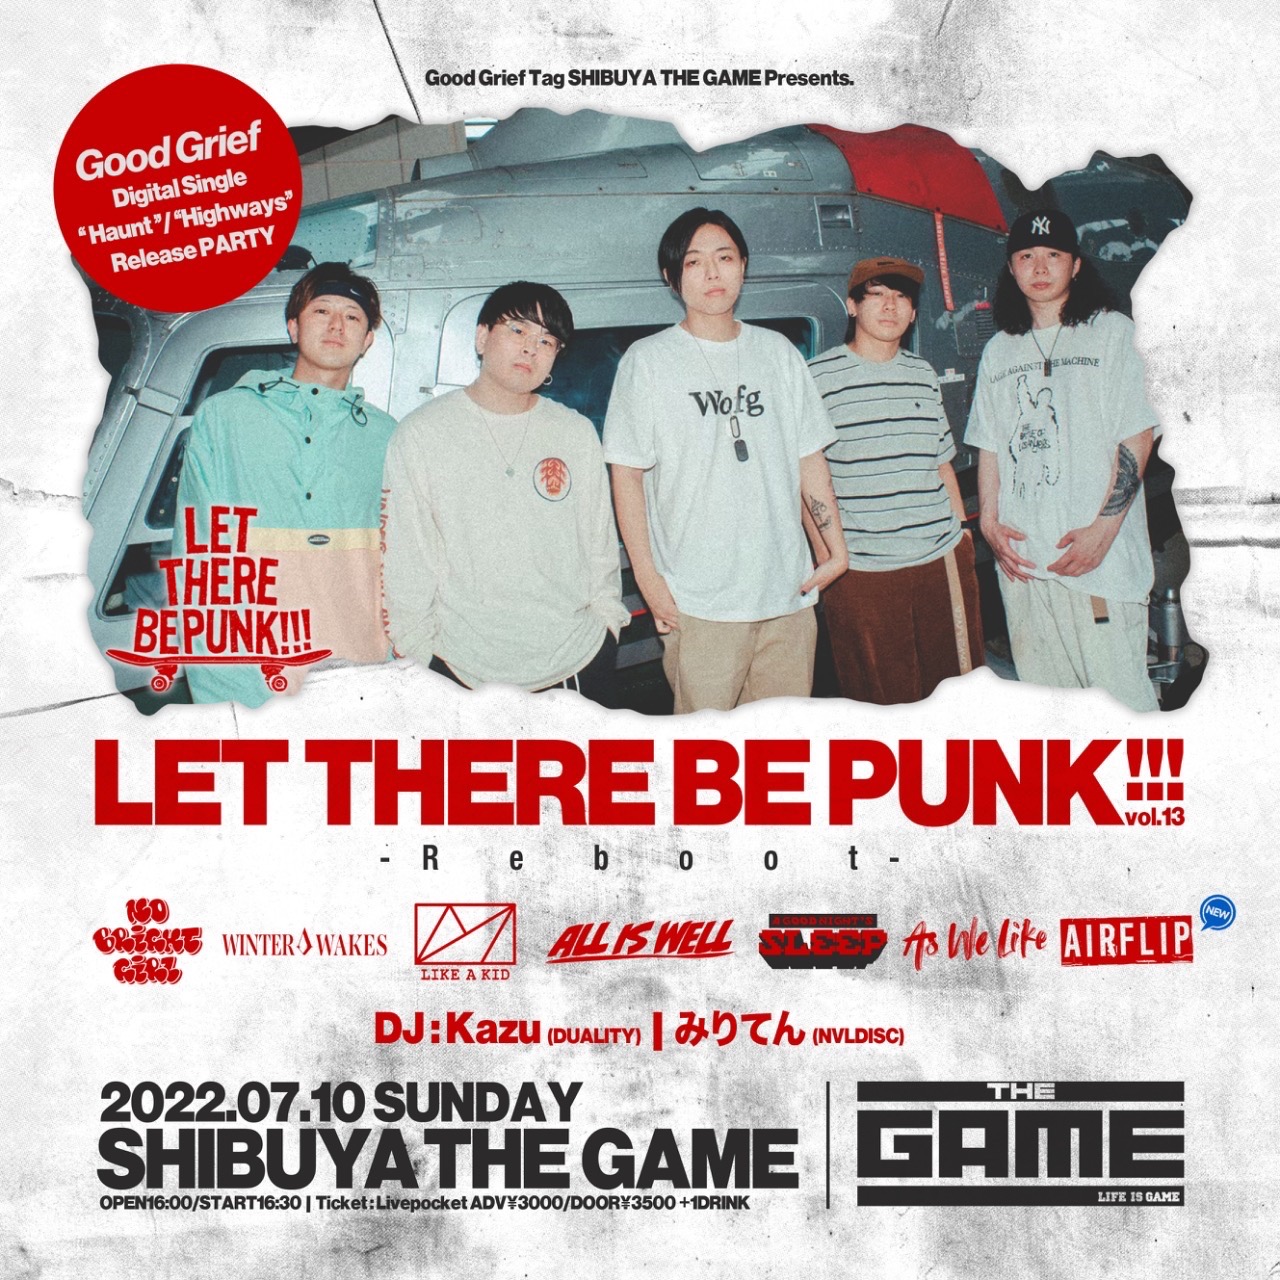 LET THERE BE PUNK!!! vol.13 -Good Grief Digital Single -Haunt / Highways- Release Party-